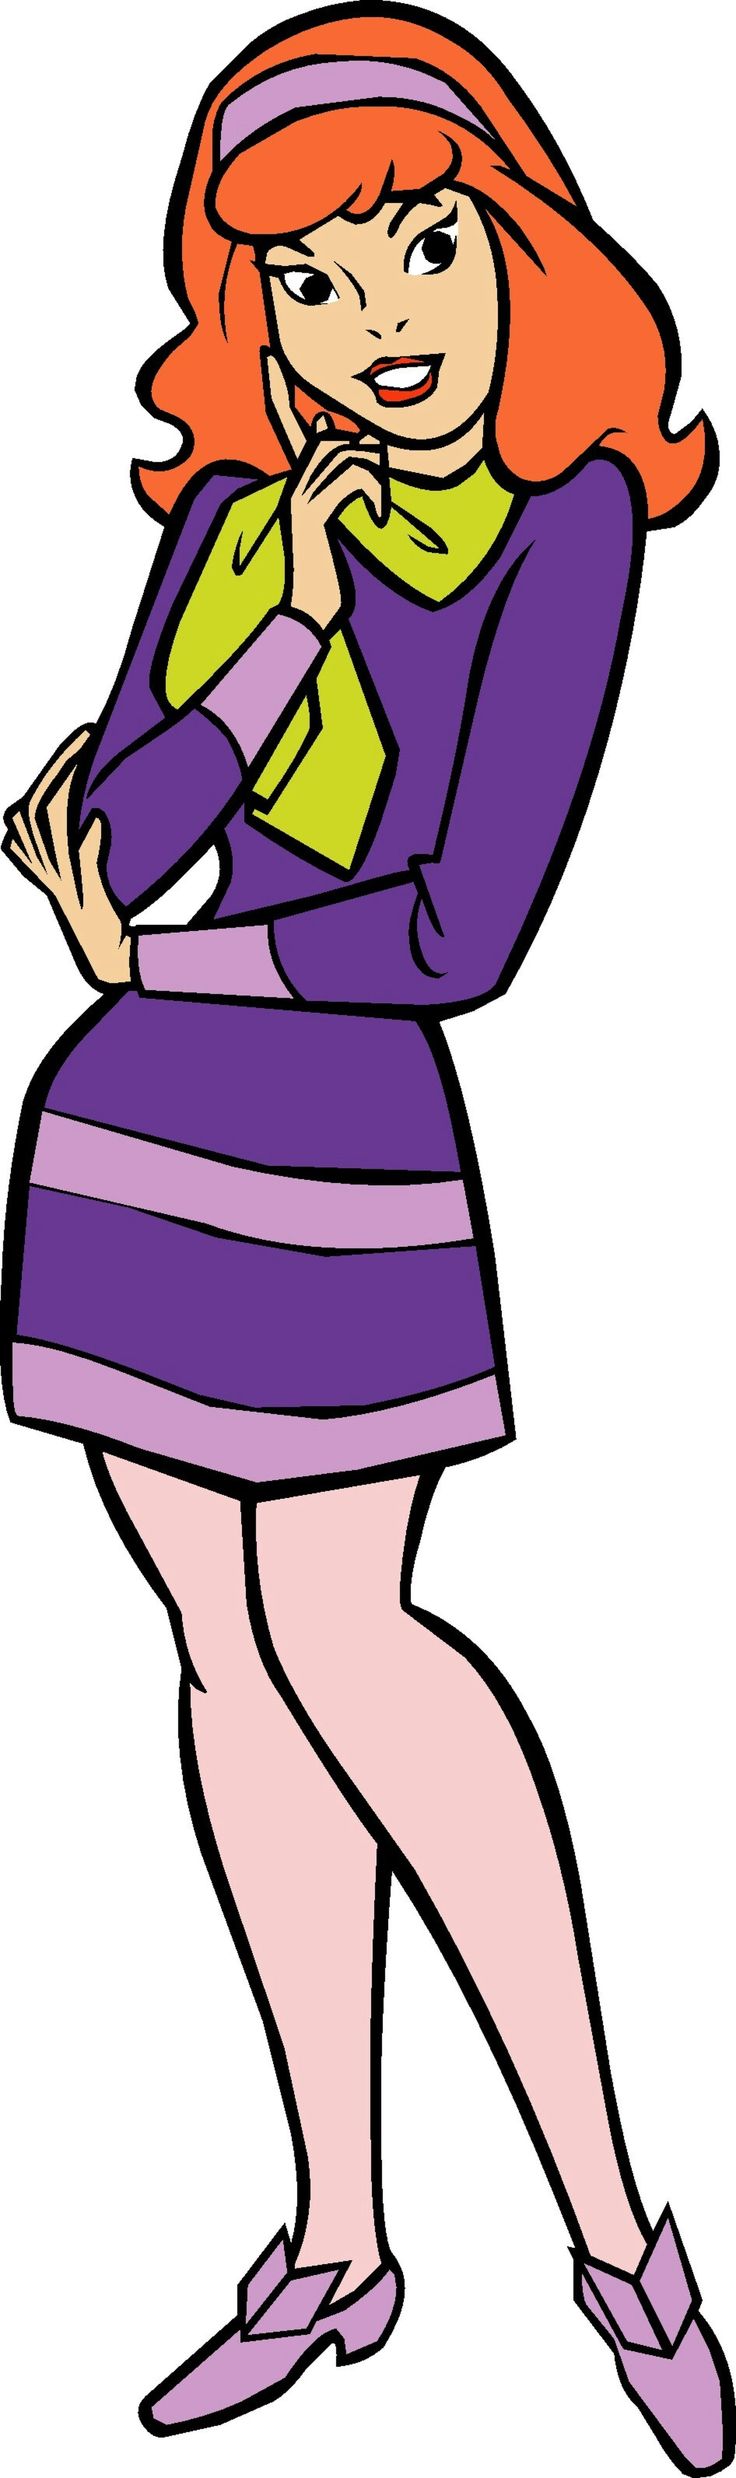 scooby doo clipart thicc